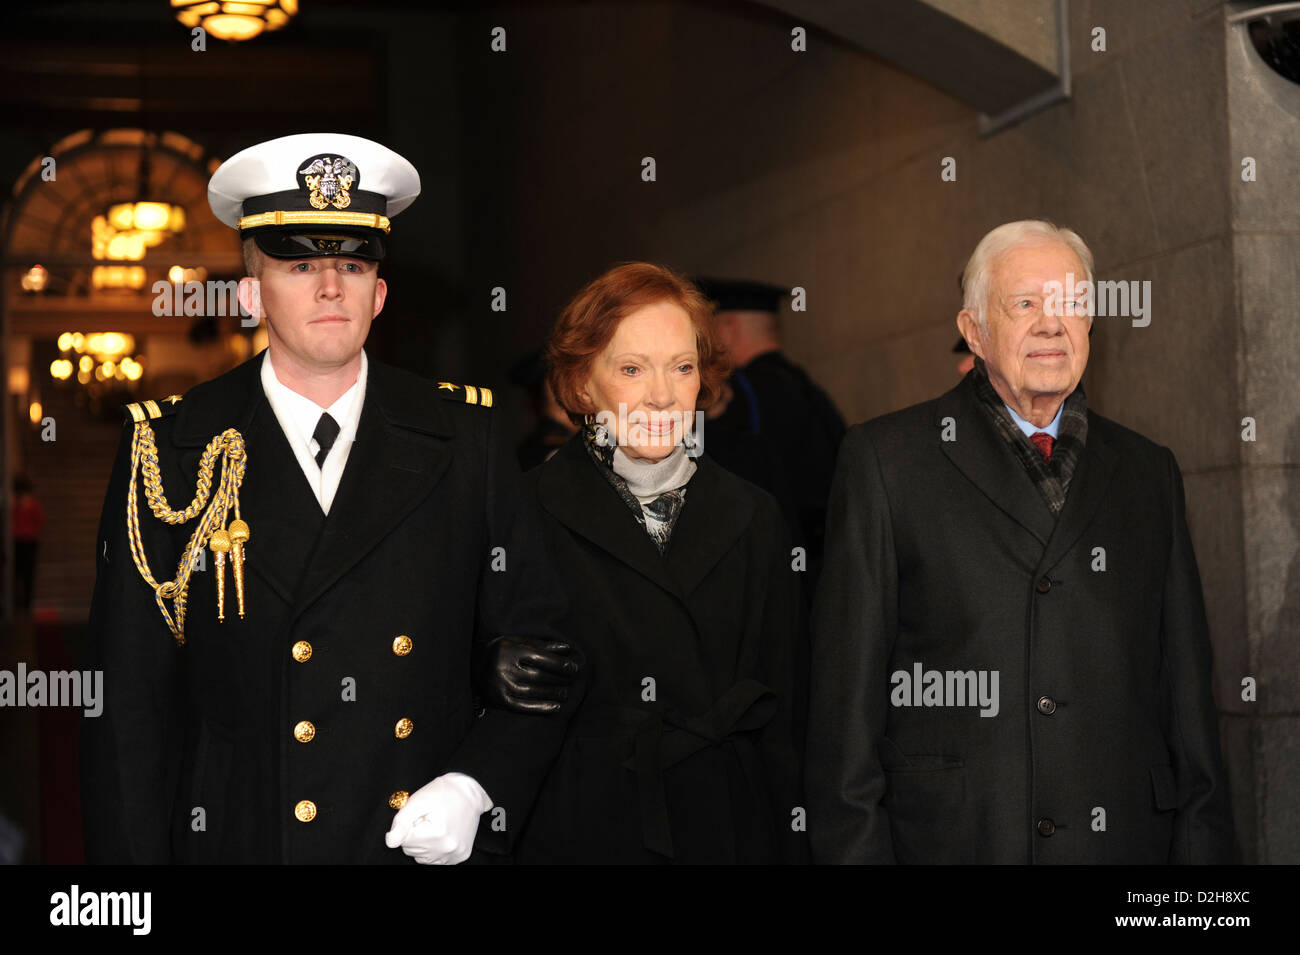 Former US Former President Jimmy Carter and his wife Rosalyn Carter are escorted to the platform for the swearing in ceremony at the 57th Presidential Inauguration on the US Capitol January 21, 2013 in Washington, DC. Stock Photo